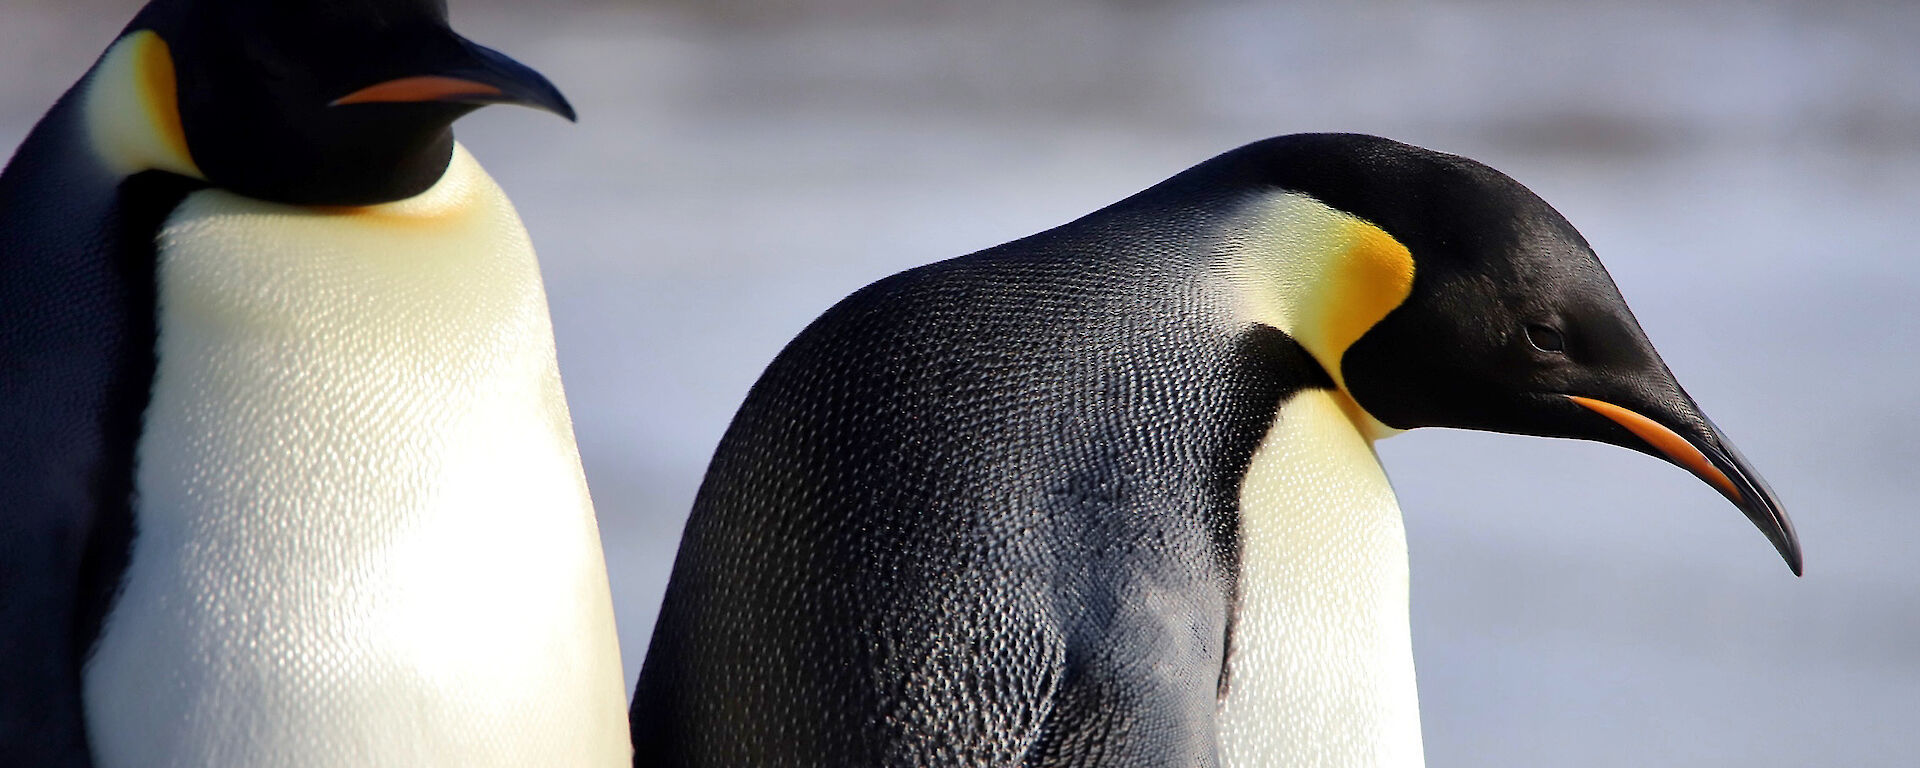 Close up shot of two emperor penguins showing their colour